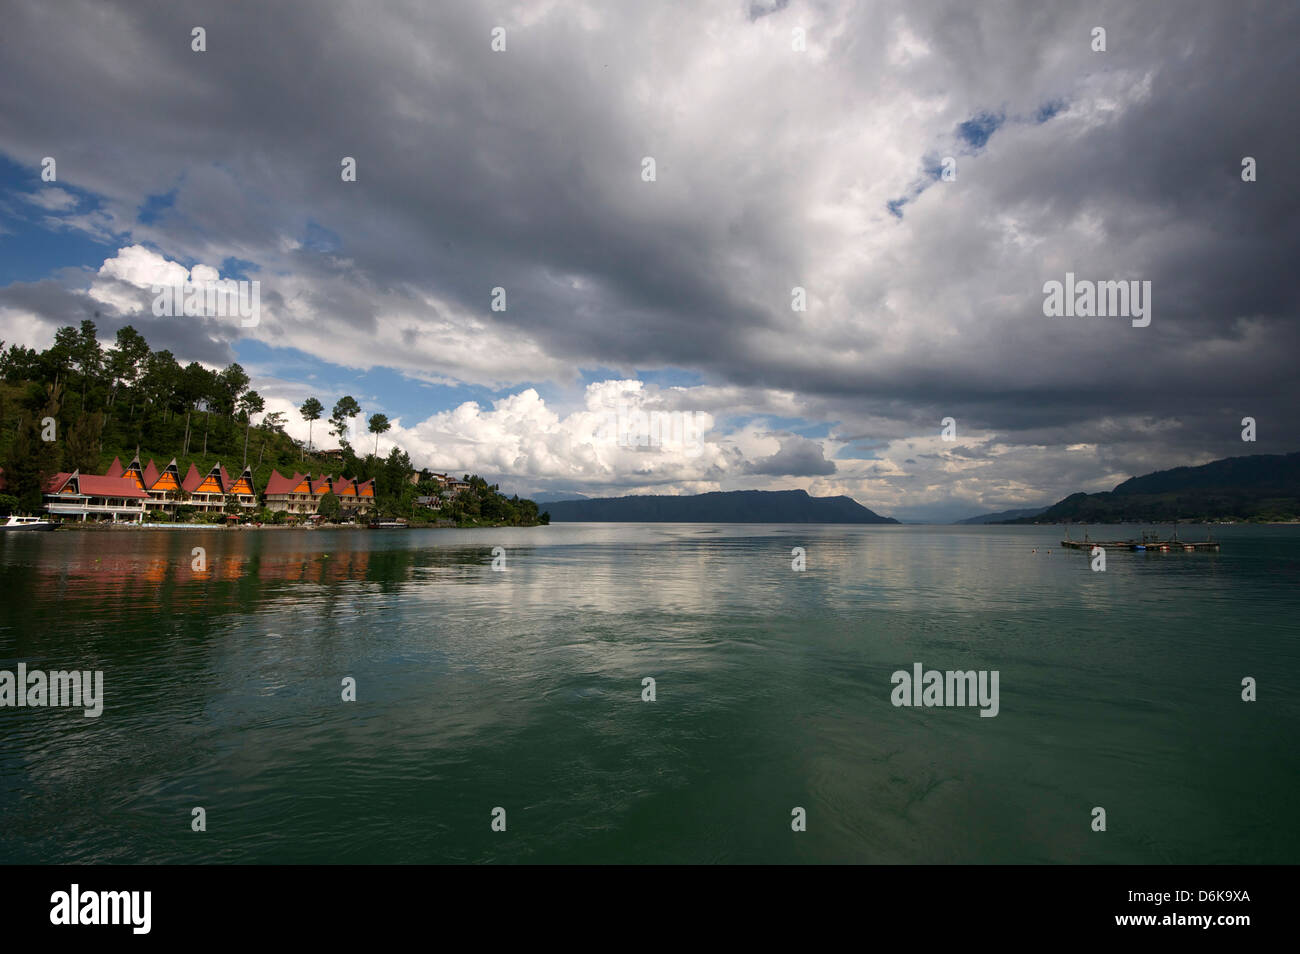 Monsoon clouds gathering over hotel on the edge of the still waters of volcanic Lake Toba, Sumatra Stock Photo